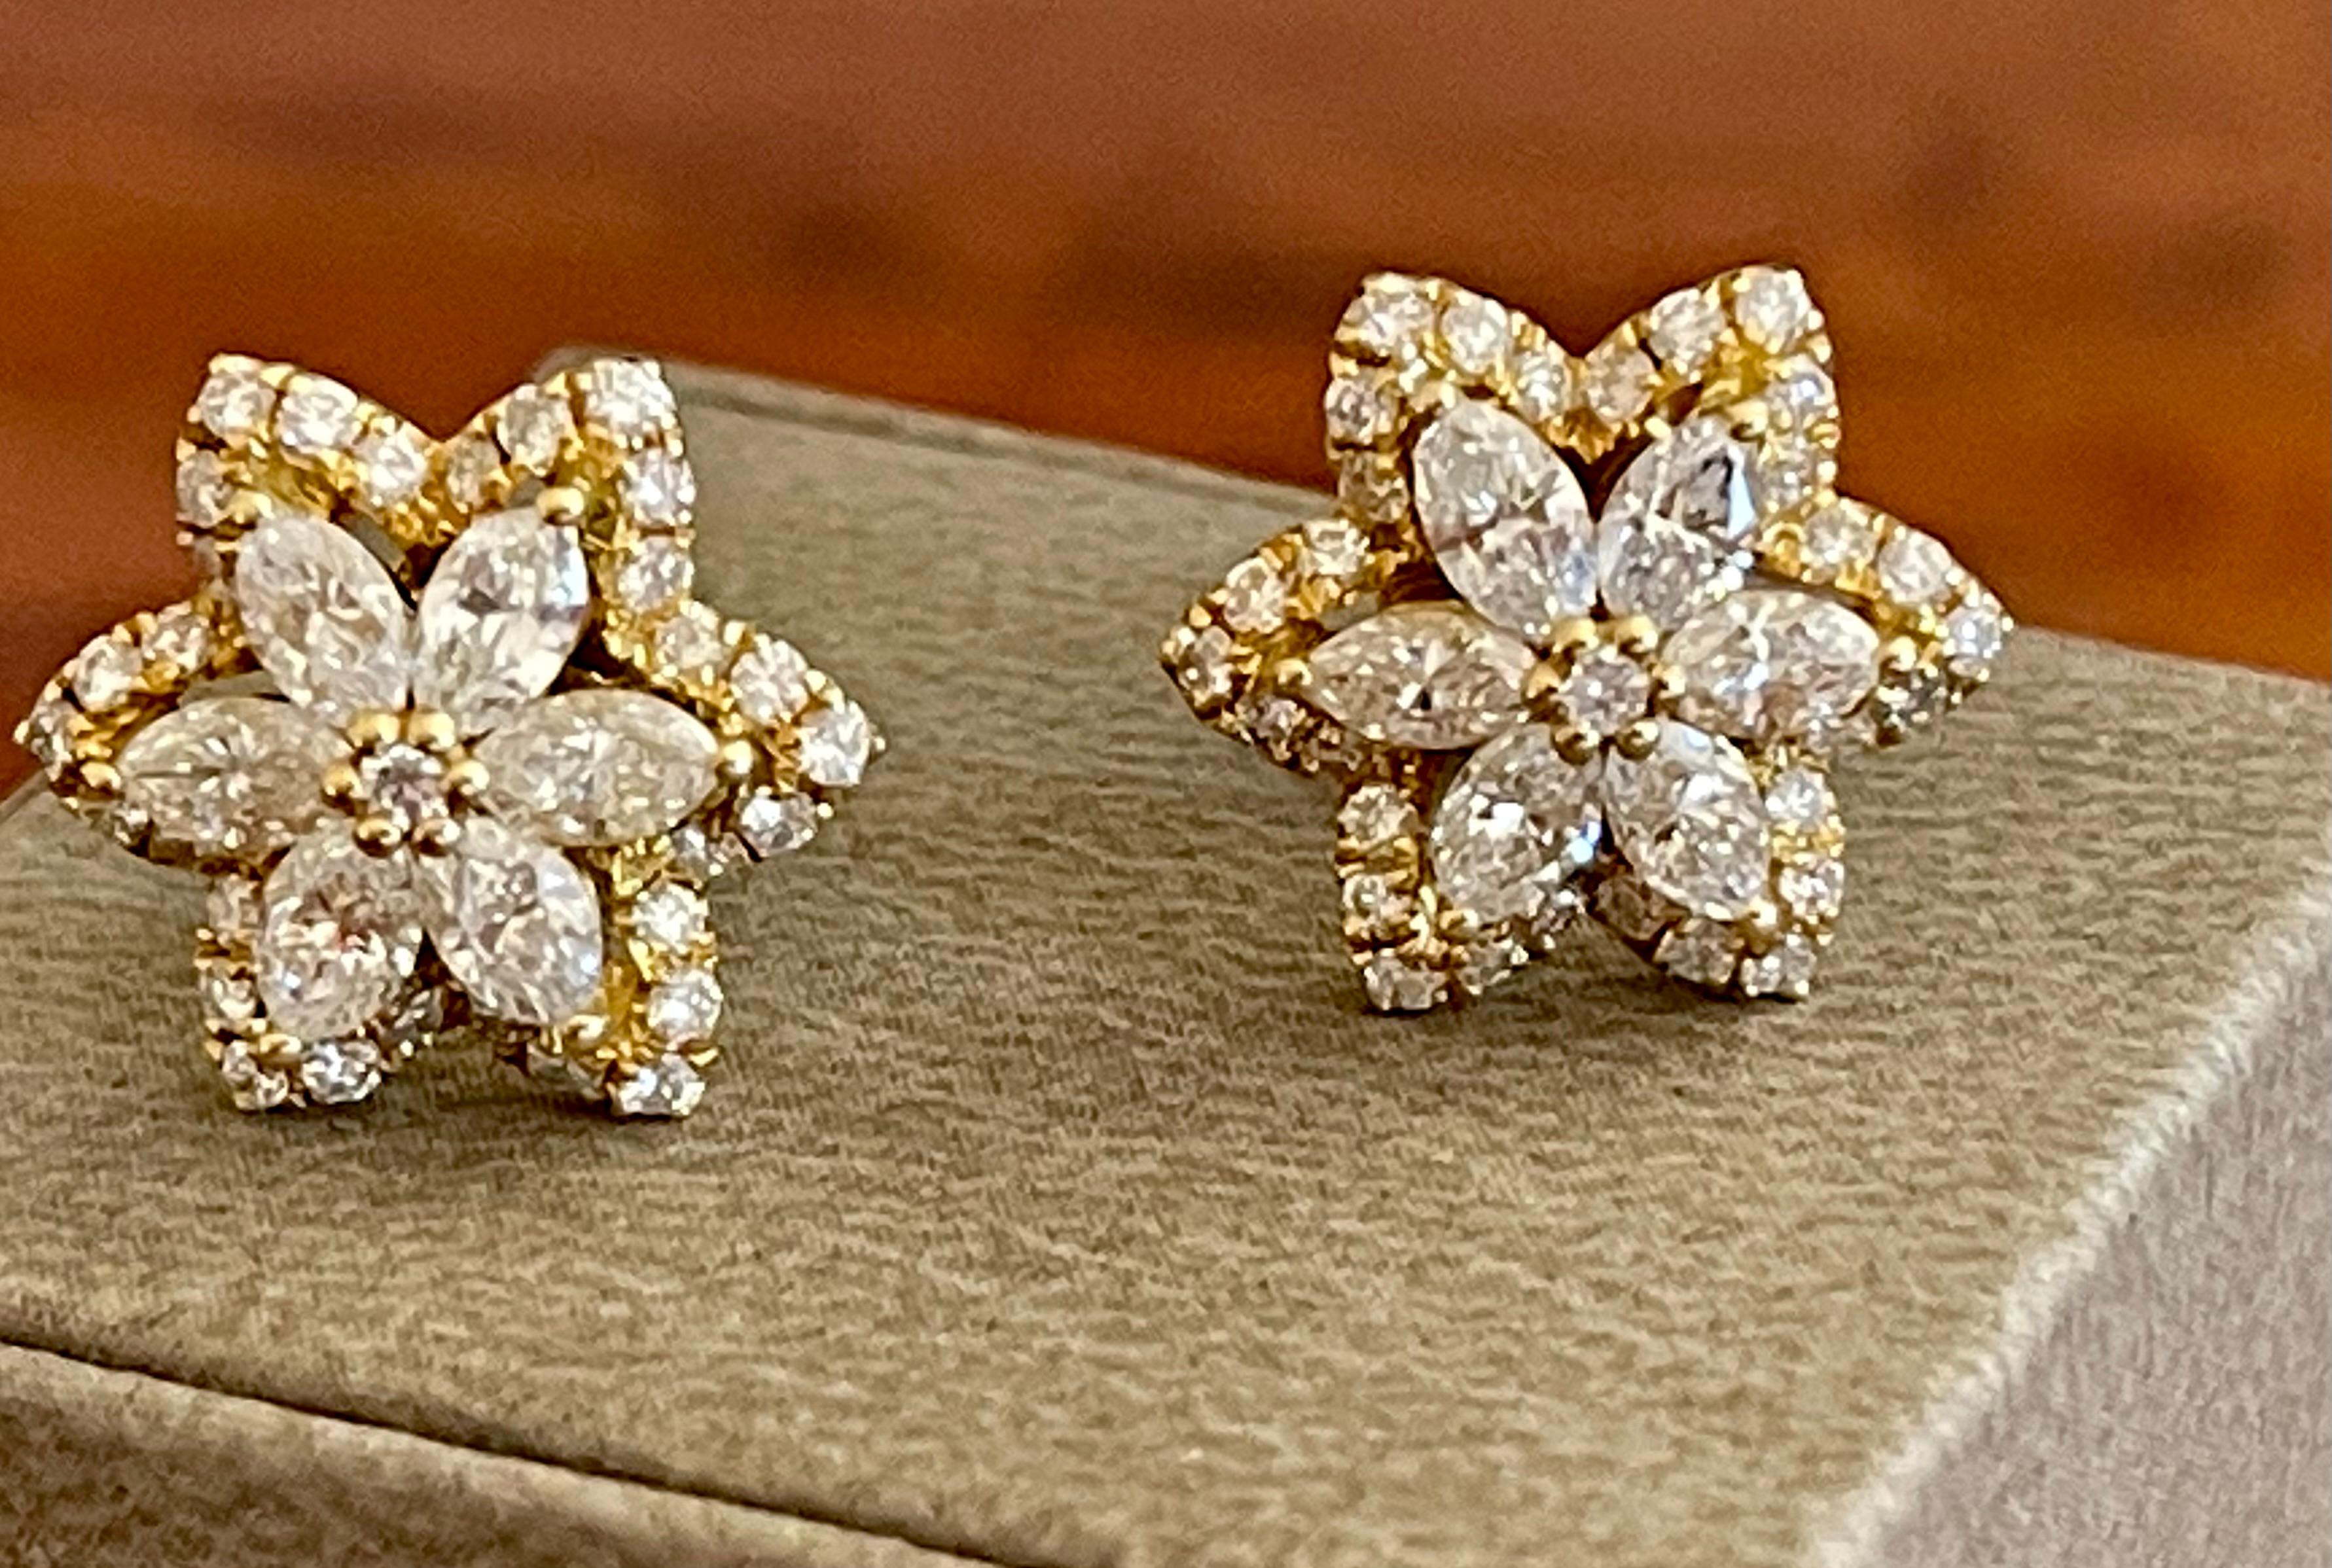 Lovely diamond starflower earrings for any occasion. Crafted in 18 K yellow Gold and set with 74 brilliant cut and marquise cut Diamonds weiging 1.98 ct. H color, si clarity. Posts with a heavy push backs will keep these secure in place. 
Width: